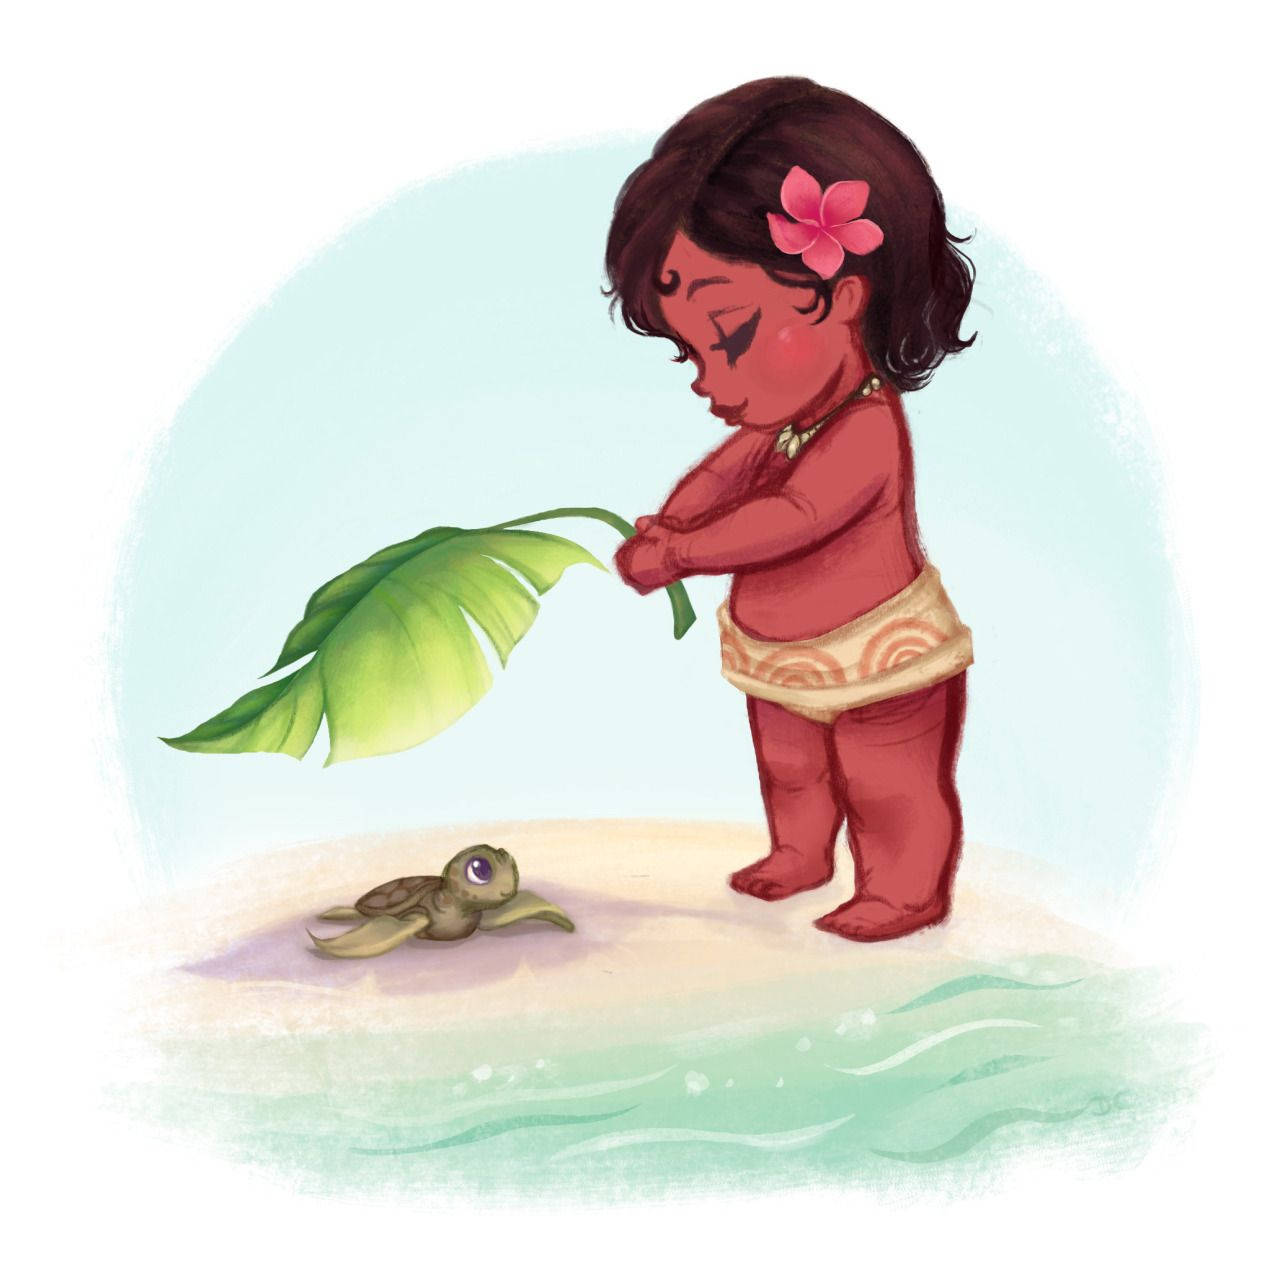 Baby Moana And Turtle Wallpaper